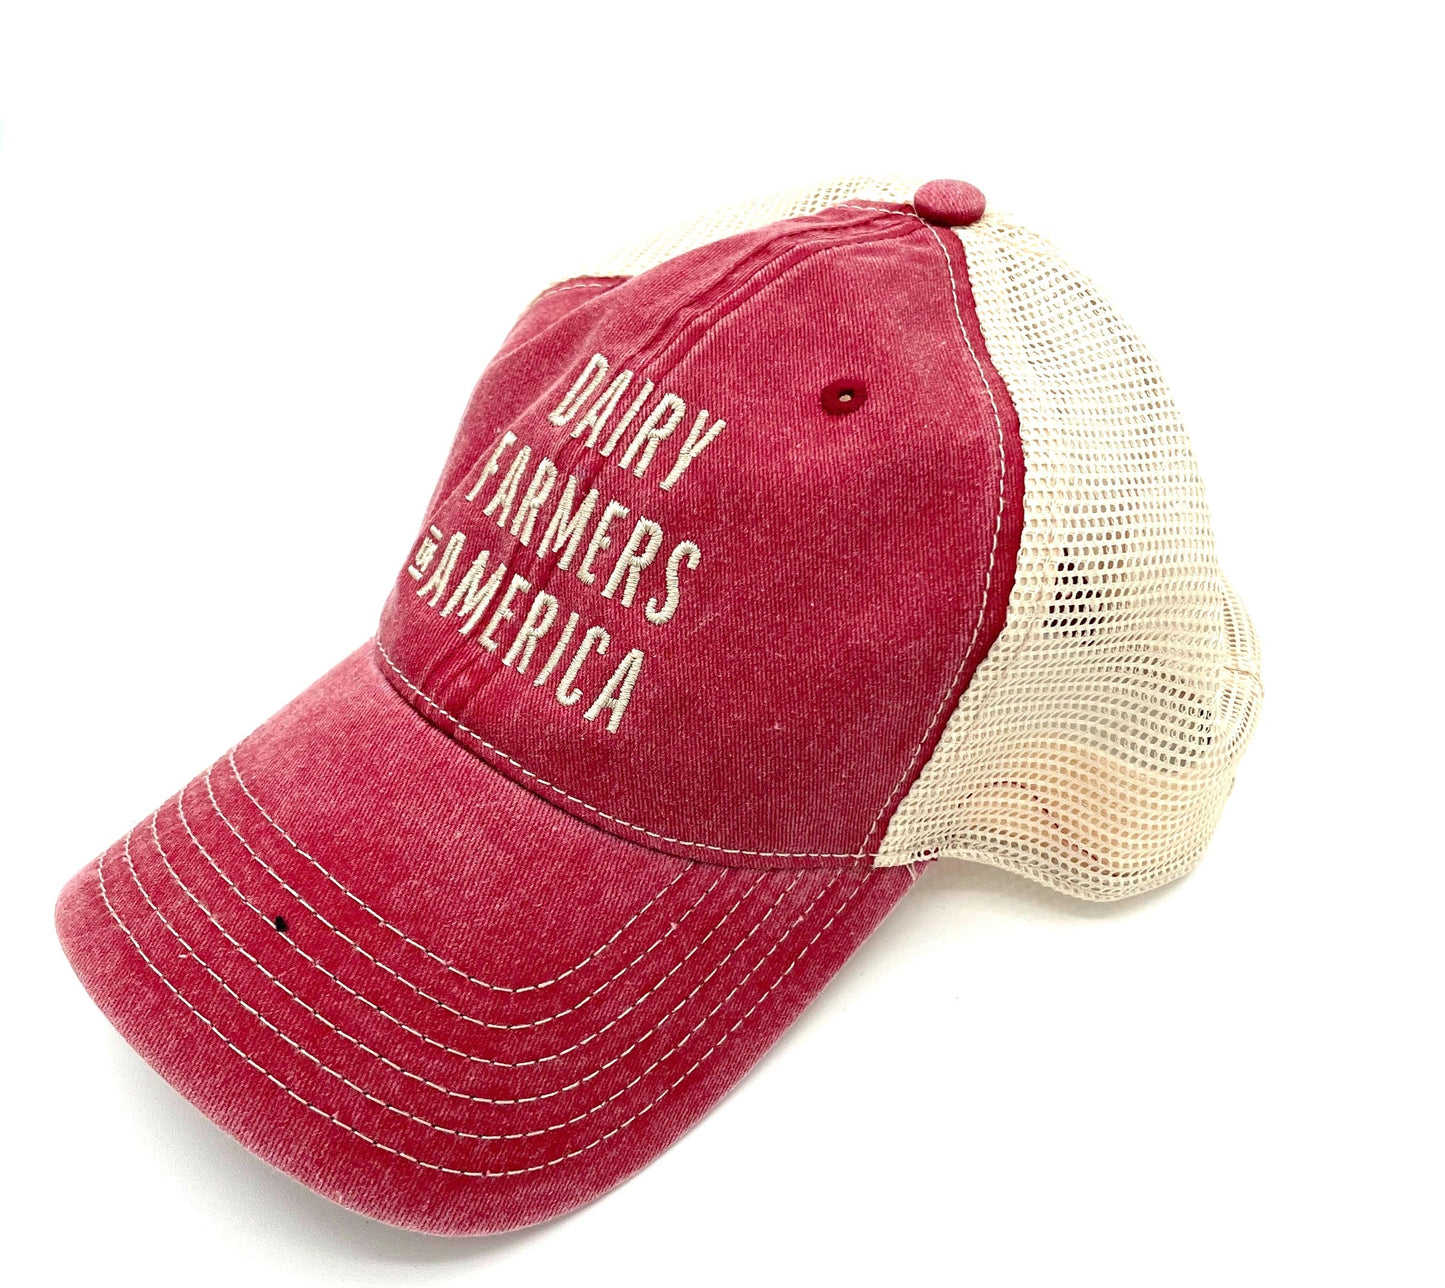 "Dairy Farmers of America, est. 1998" washed trucker mesh cap